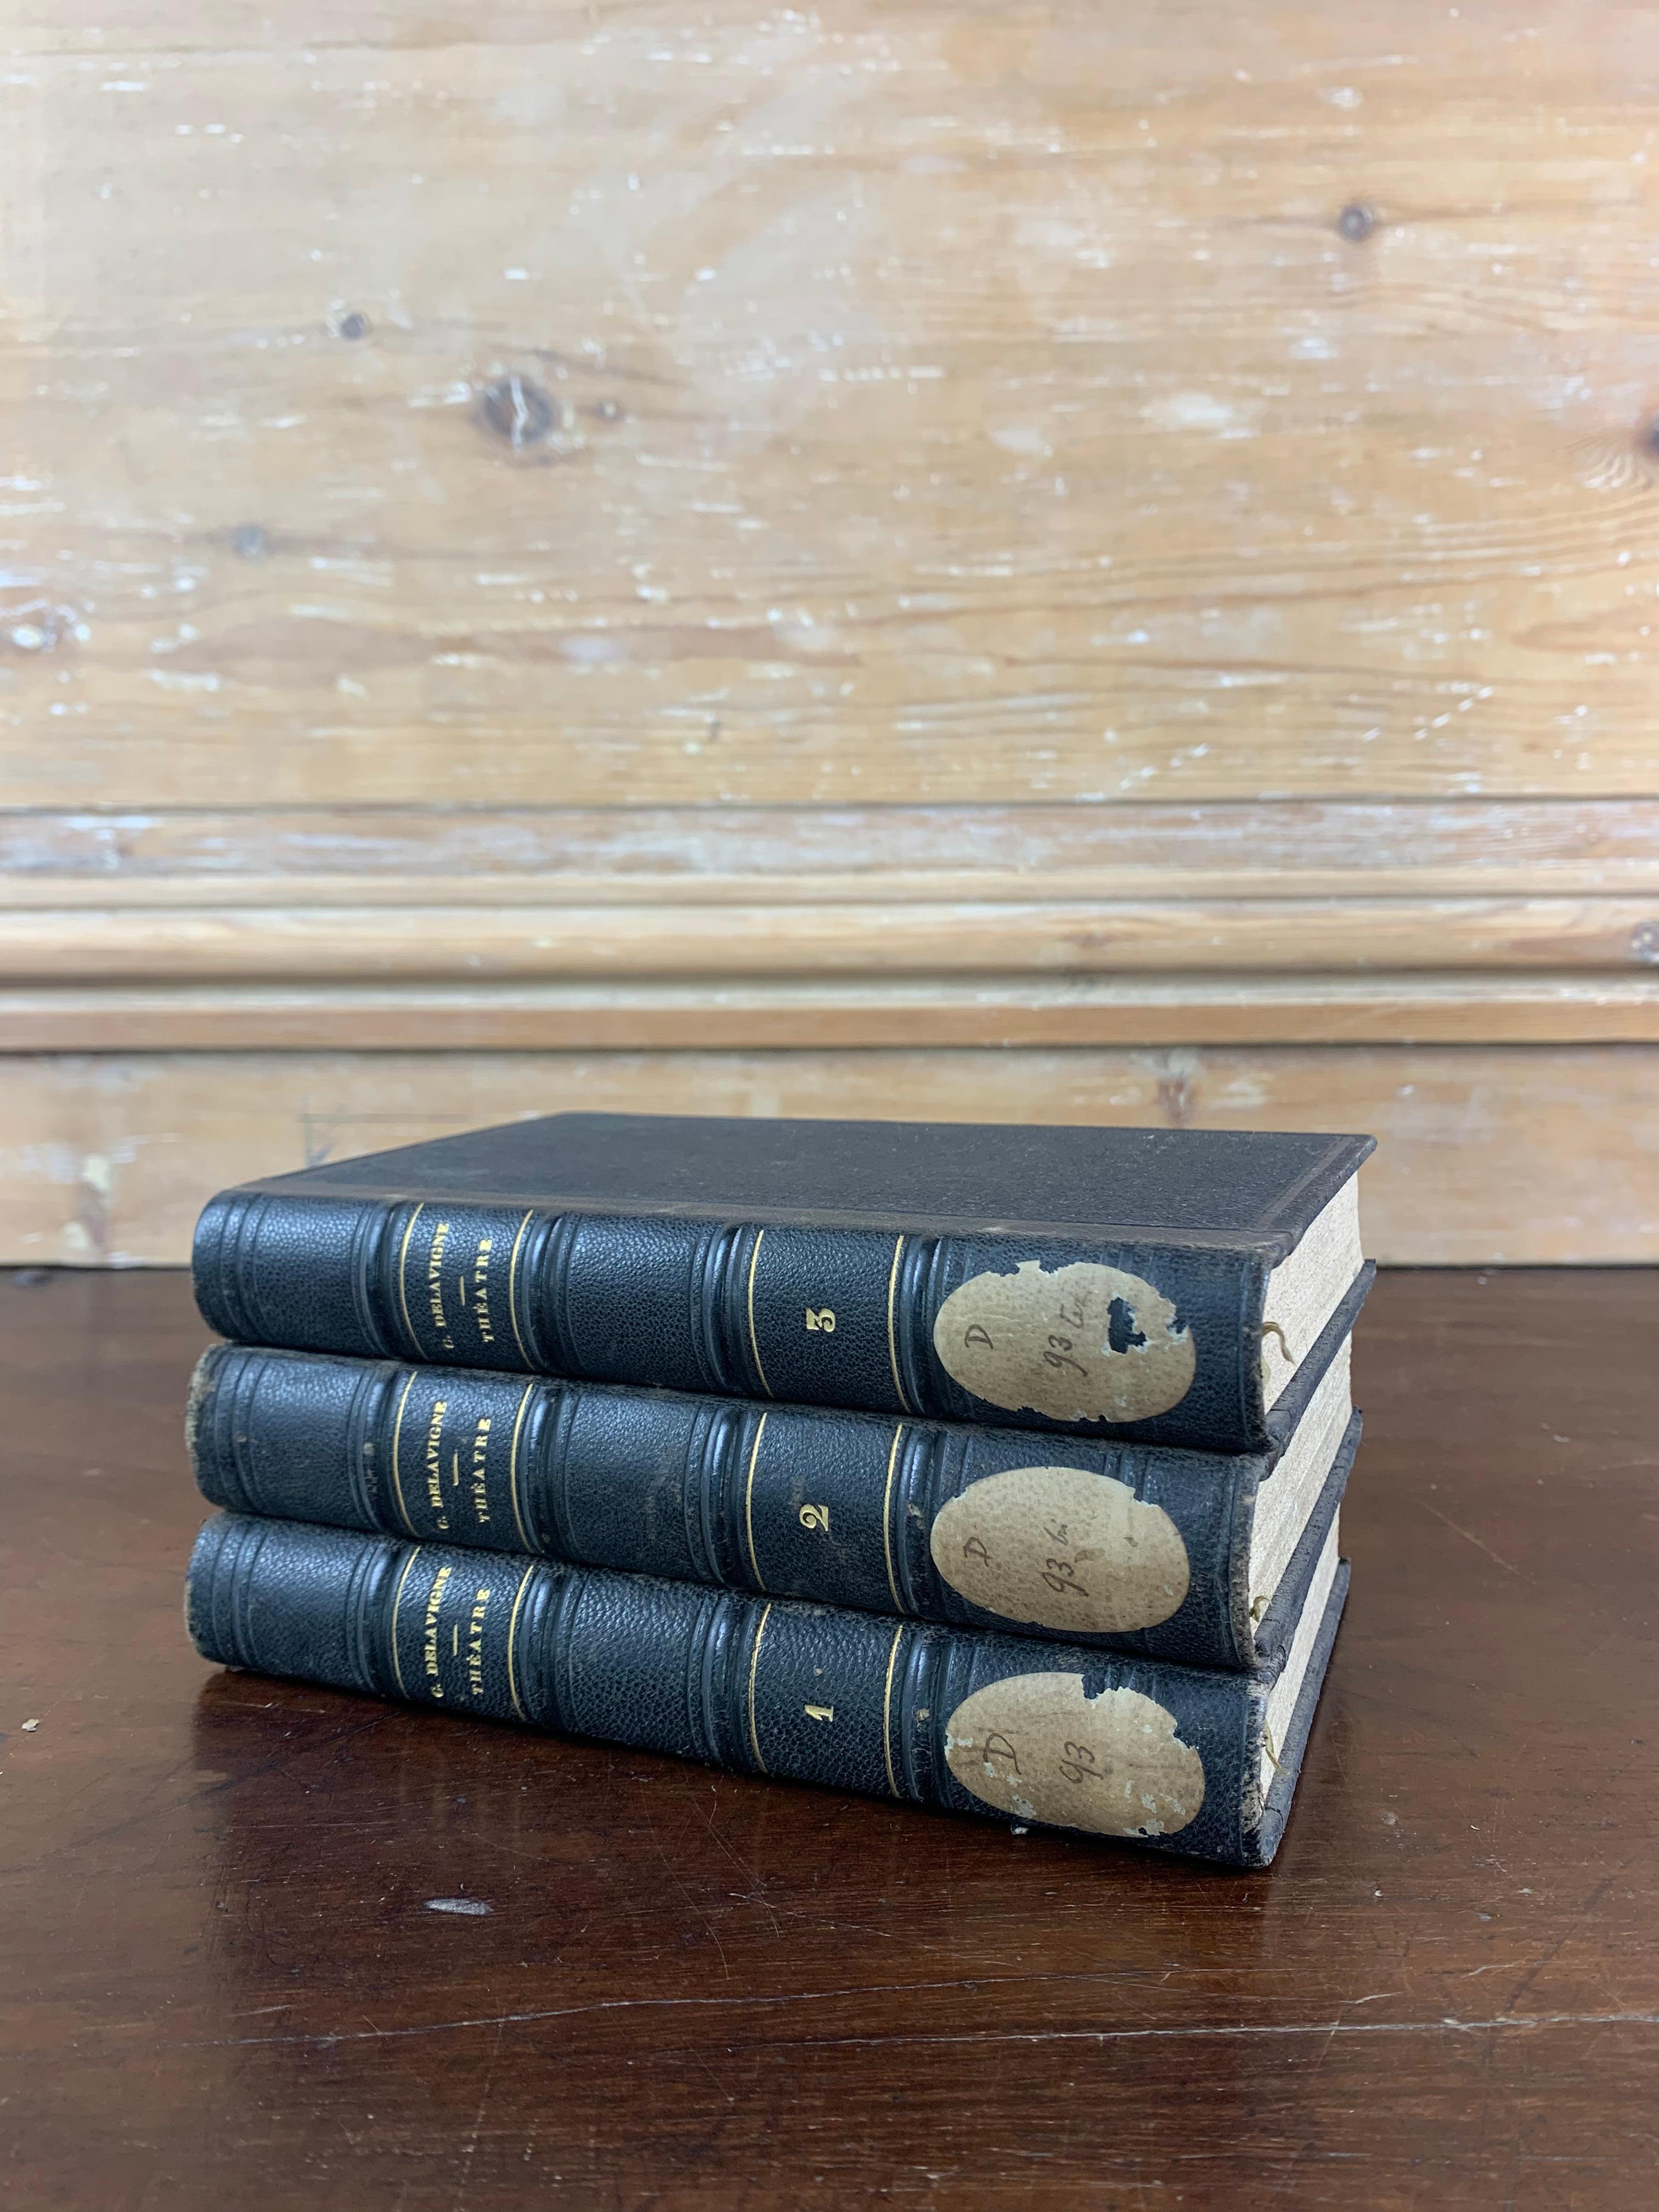 Set of old bound books dating from the 19th century. From an old protestant library near Le Havre in France. These 3 books are the set of different plays by Casimir Delavigne of the French Academy. These beautiful books are perfect to fill a nice